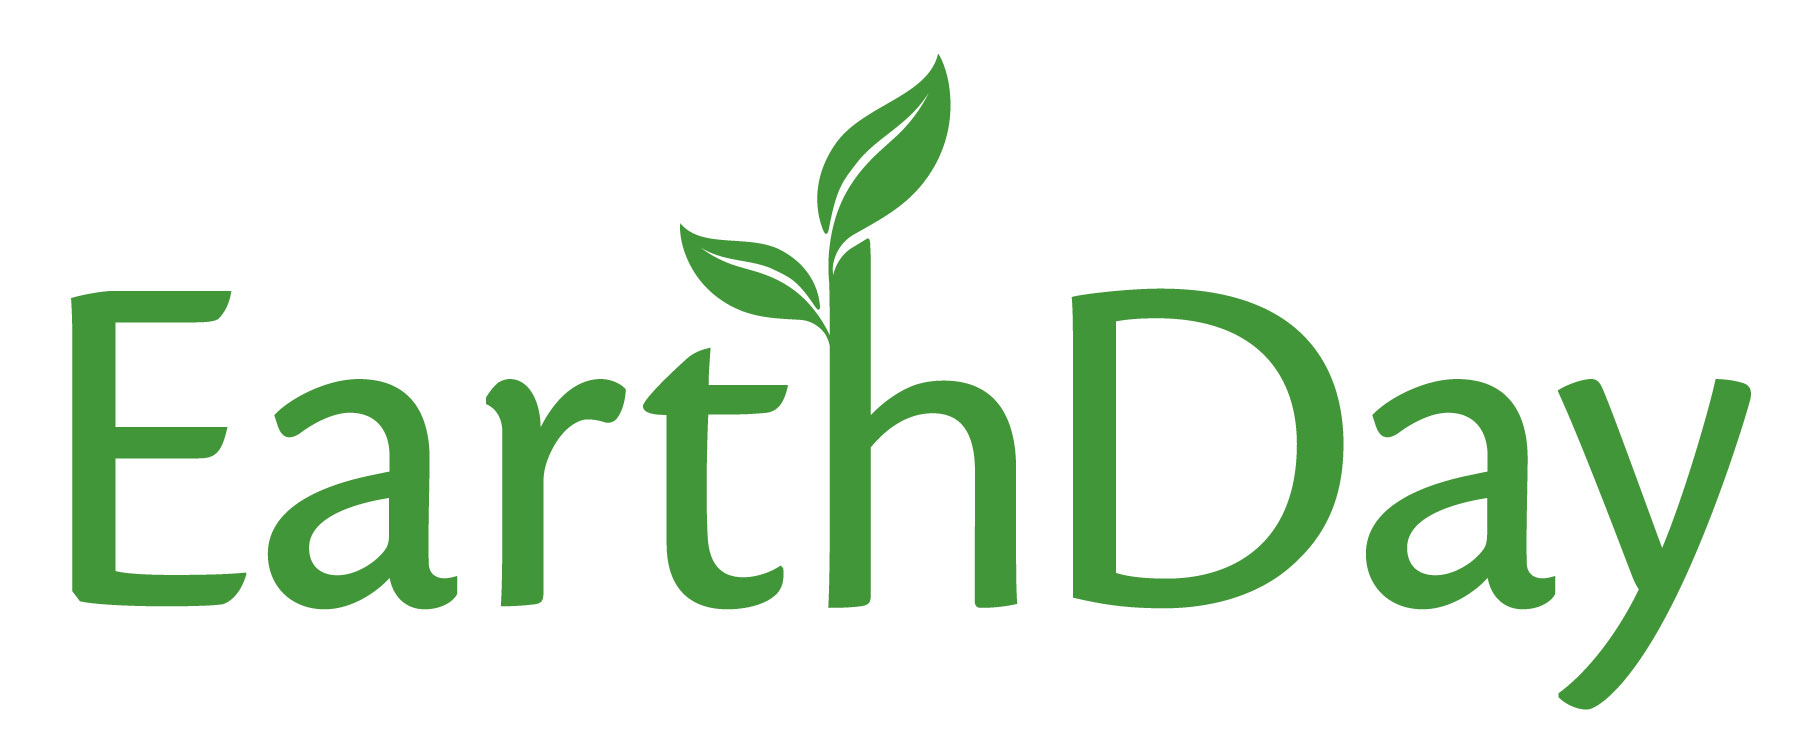 Earth Day is this Saturday, April 22 !